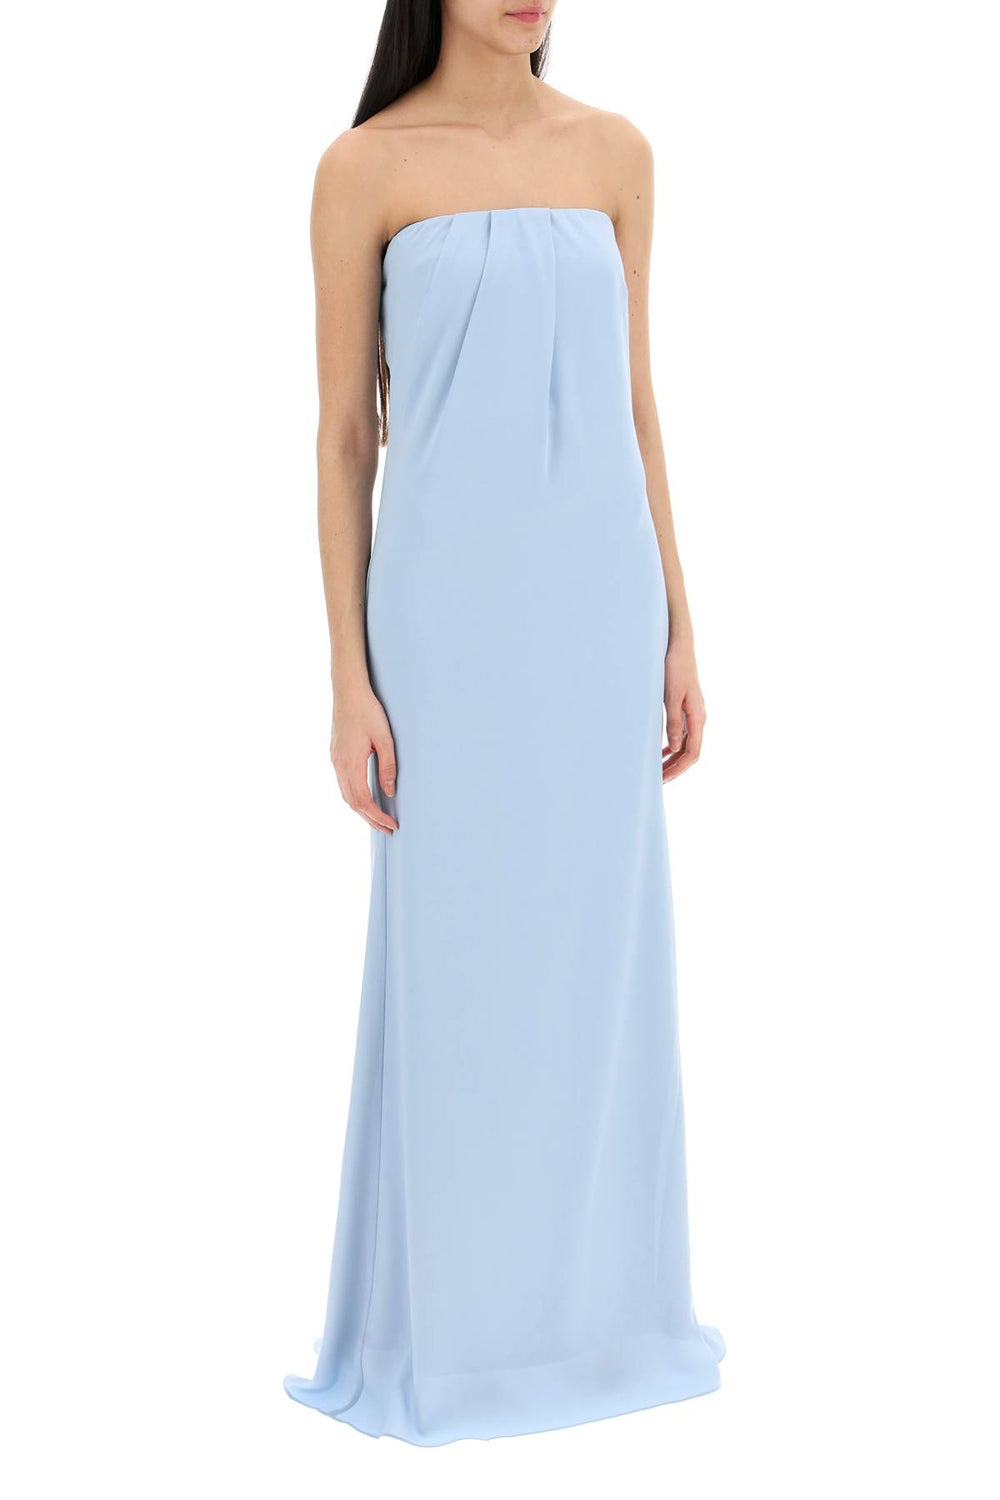 strapless satin crepe dress without-1